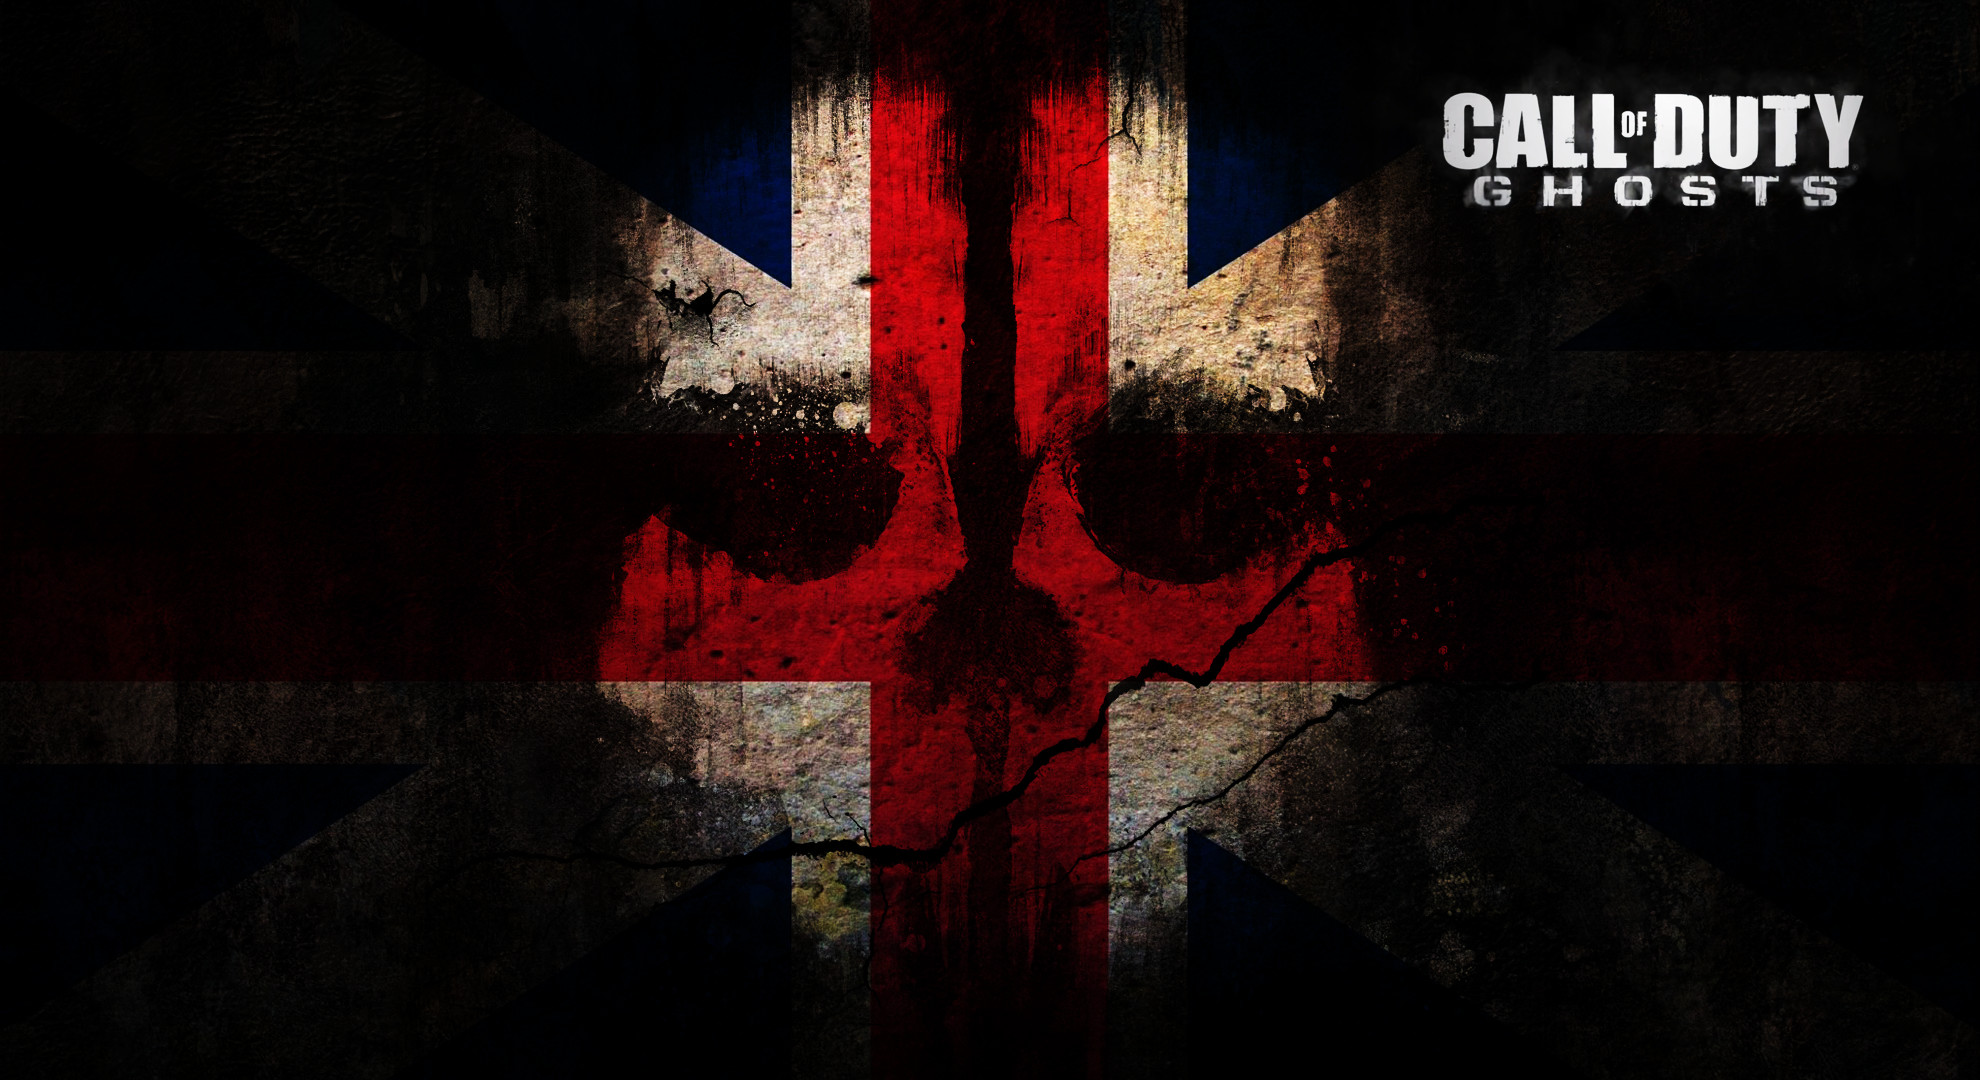 1980x1080 ... Call Of Duty Ghosts Wallpaper 1080p by sorr535771